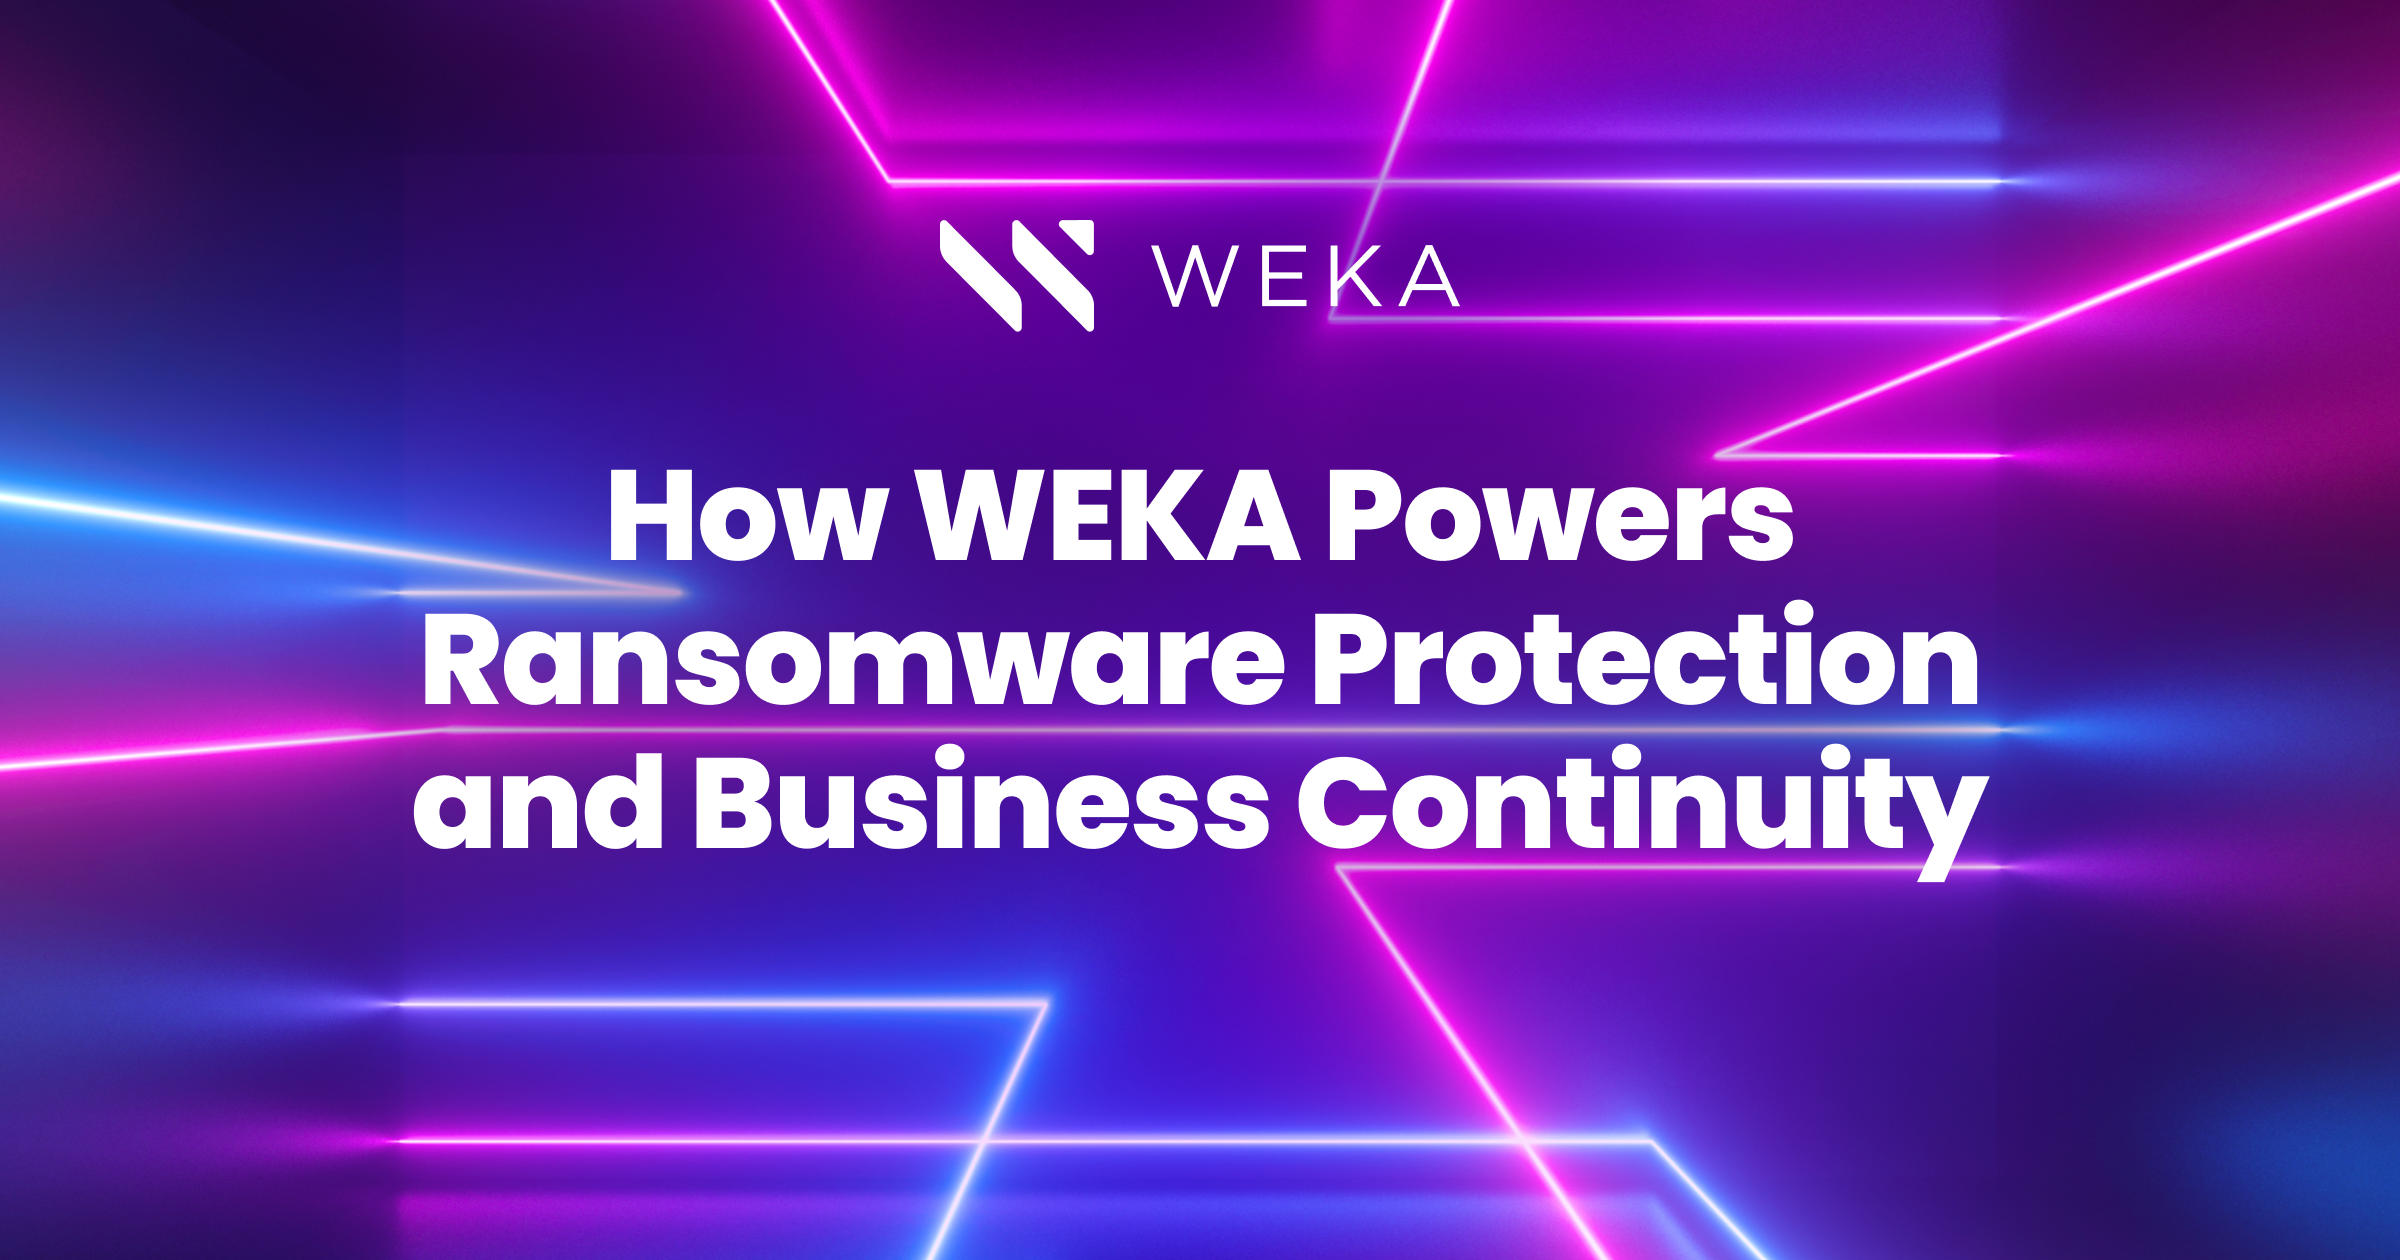 How WEKA Powers Ransomware Protection and Business Continuity